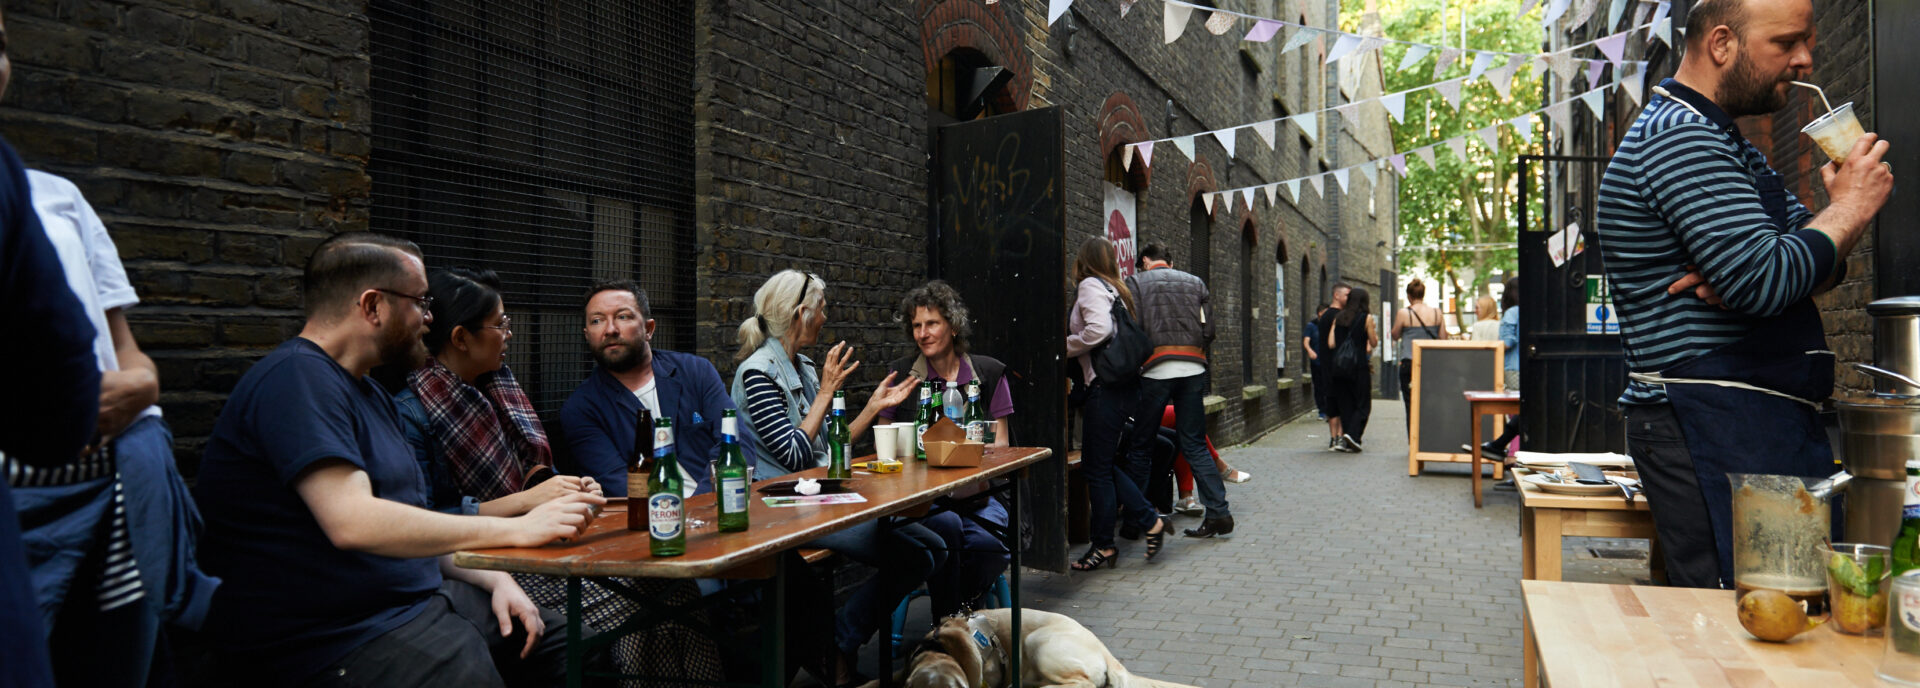 People sit at a table with food and drink in an allyway, pastel bunting is overhead